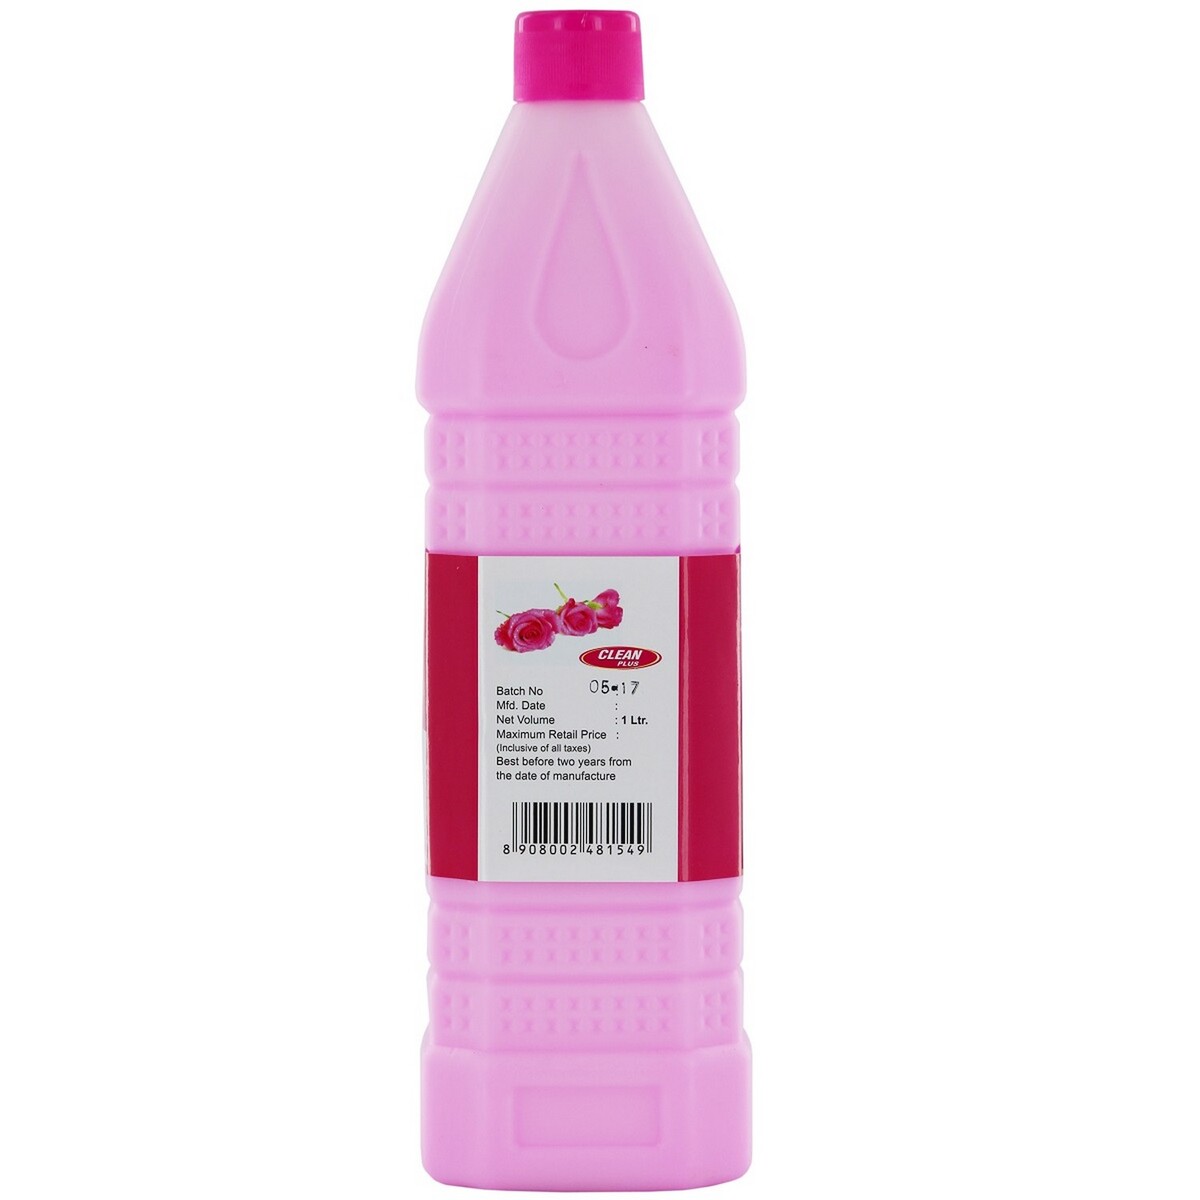 Clean Plus Cleaning Liquid Pink Blossom 1Litre